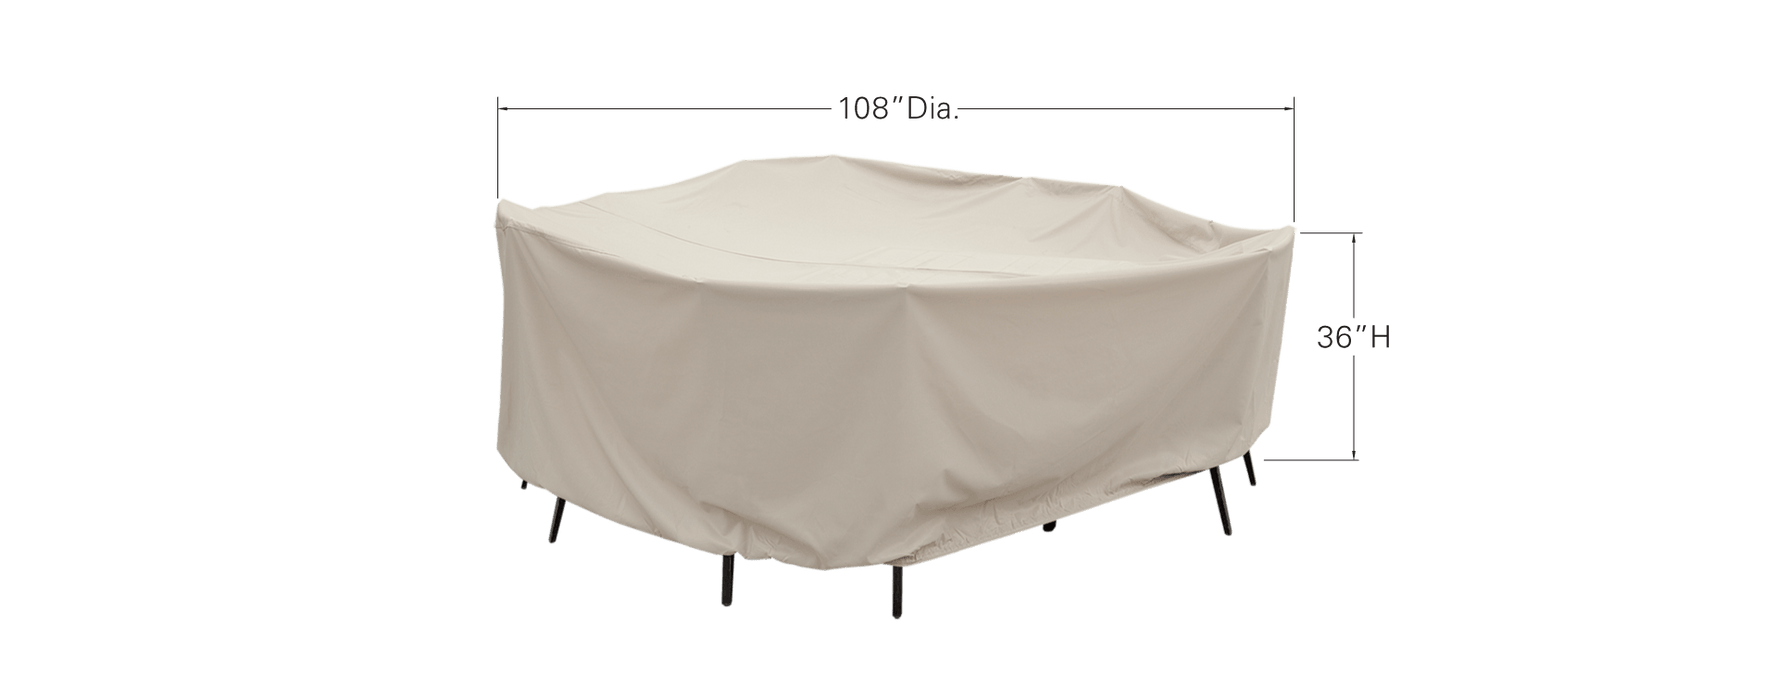 60" Round/Square Table and Chair Cover